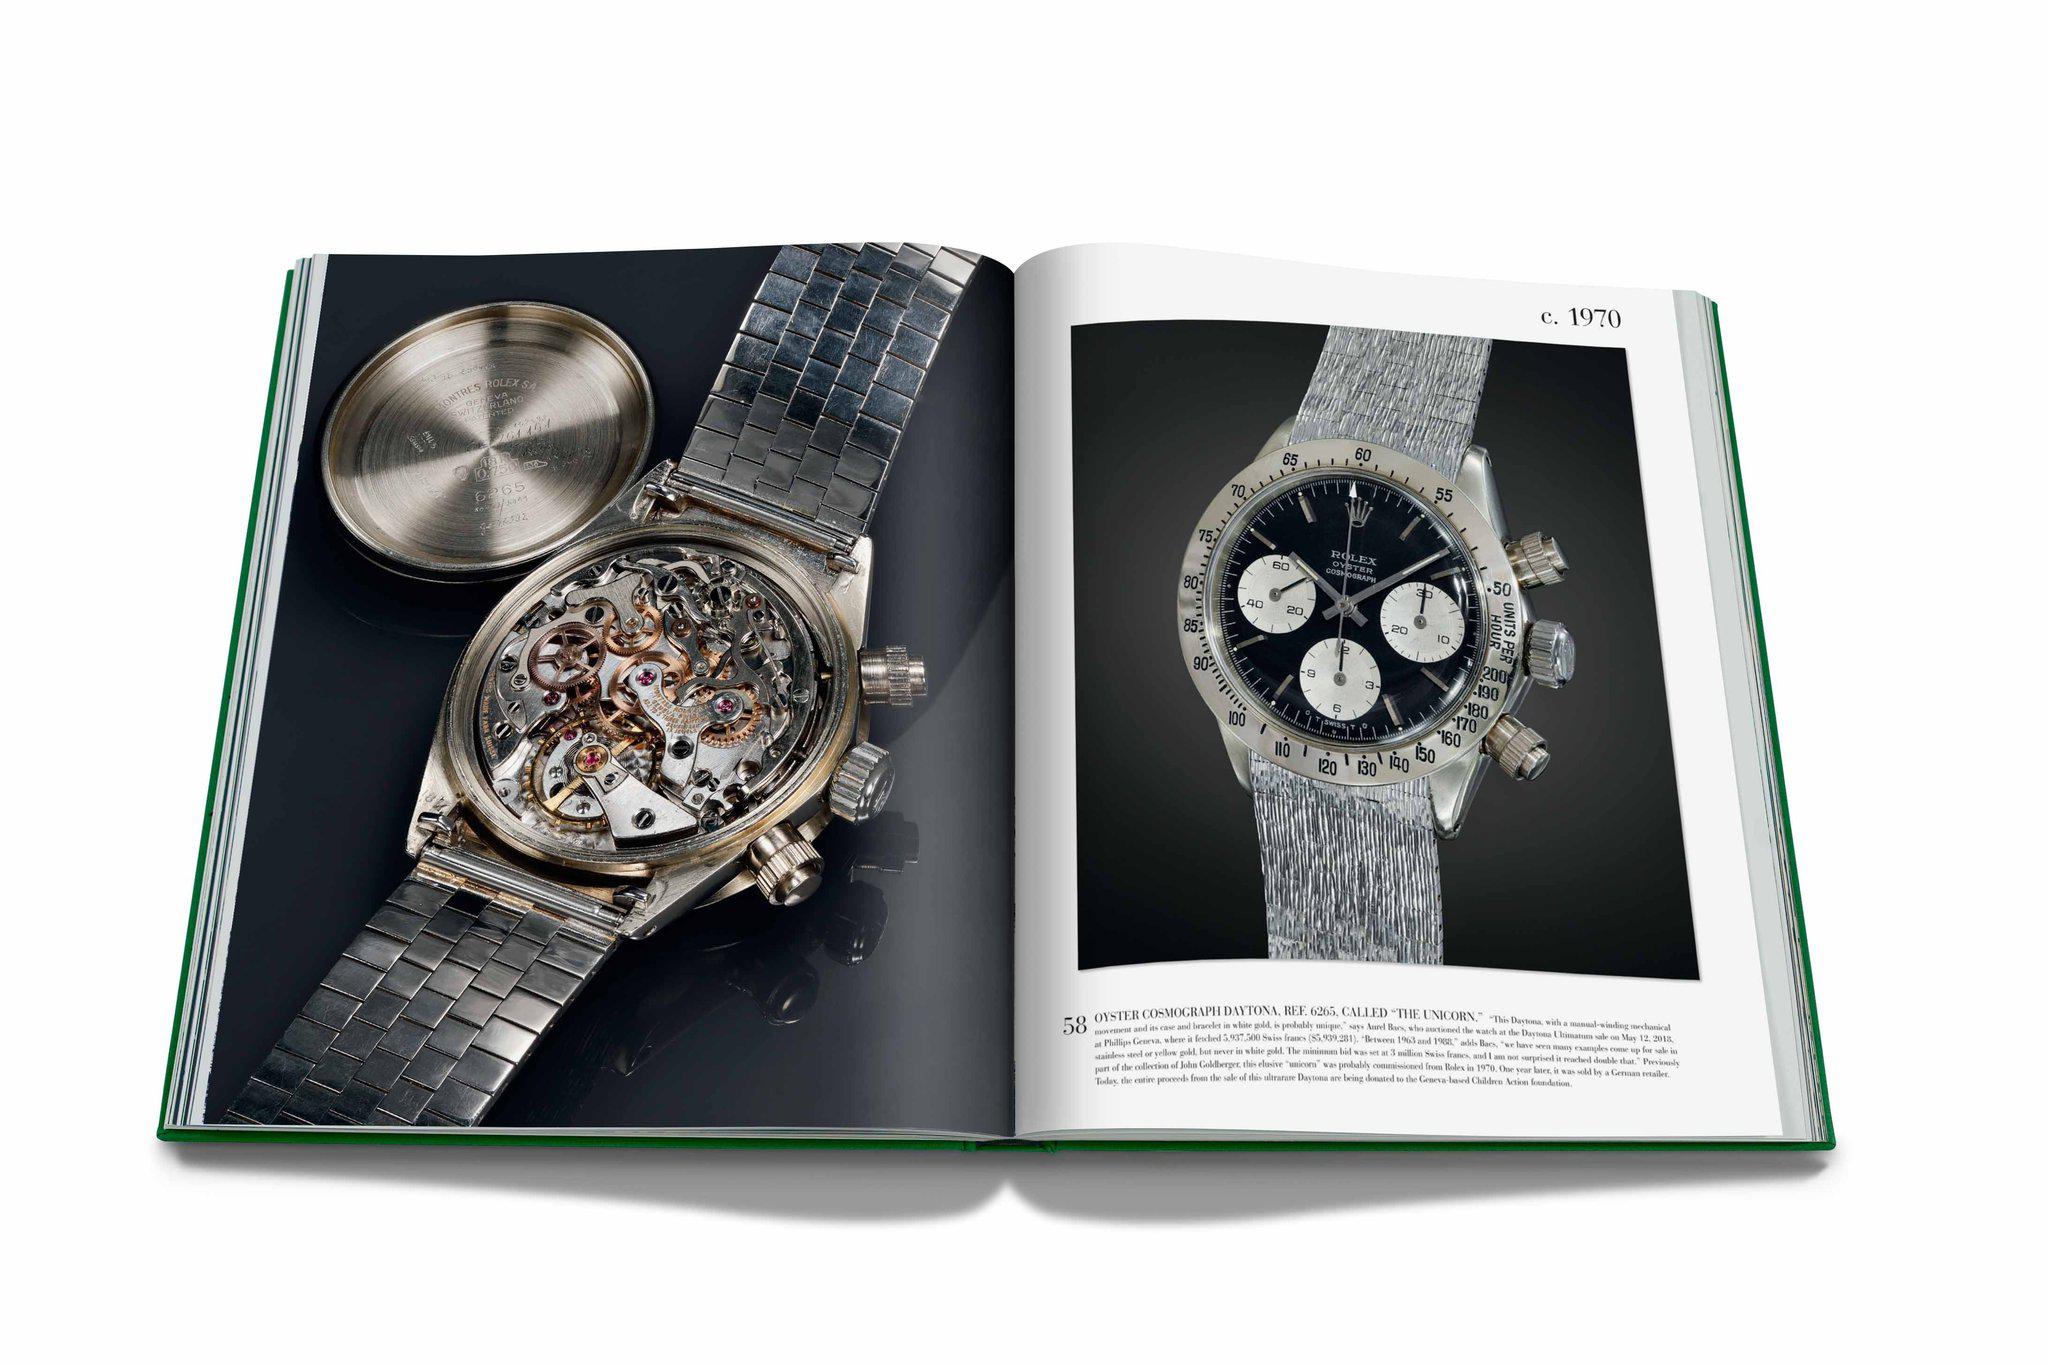 Assouline - Rolex The Impossible Collection - Coffee Table Book-TOJU Interior